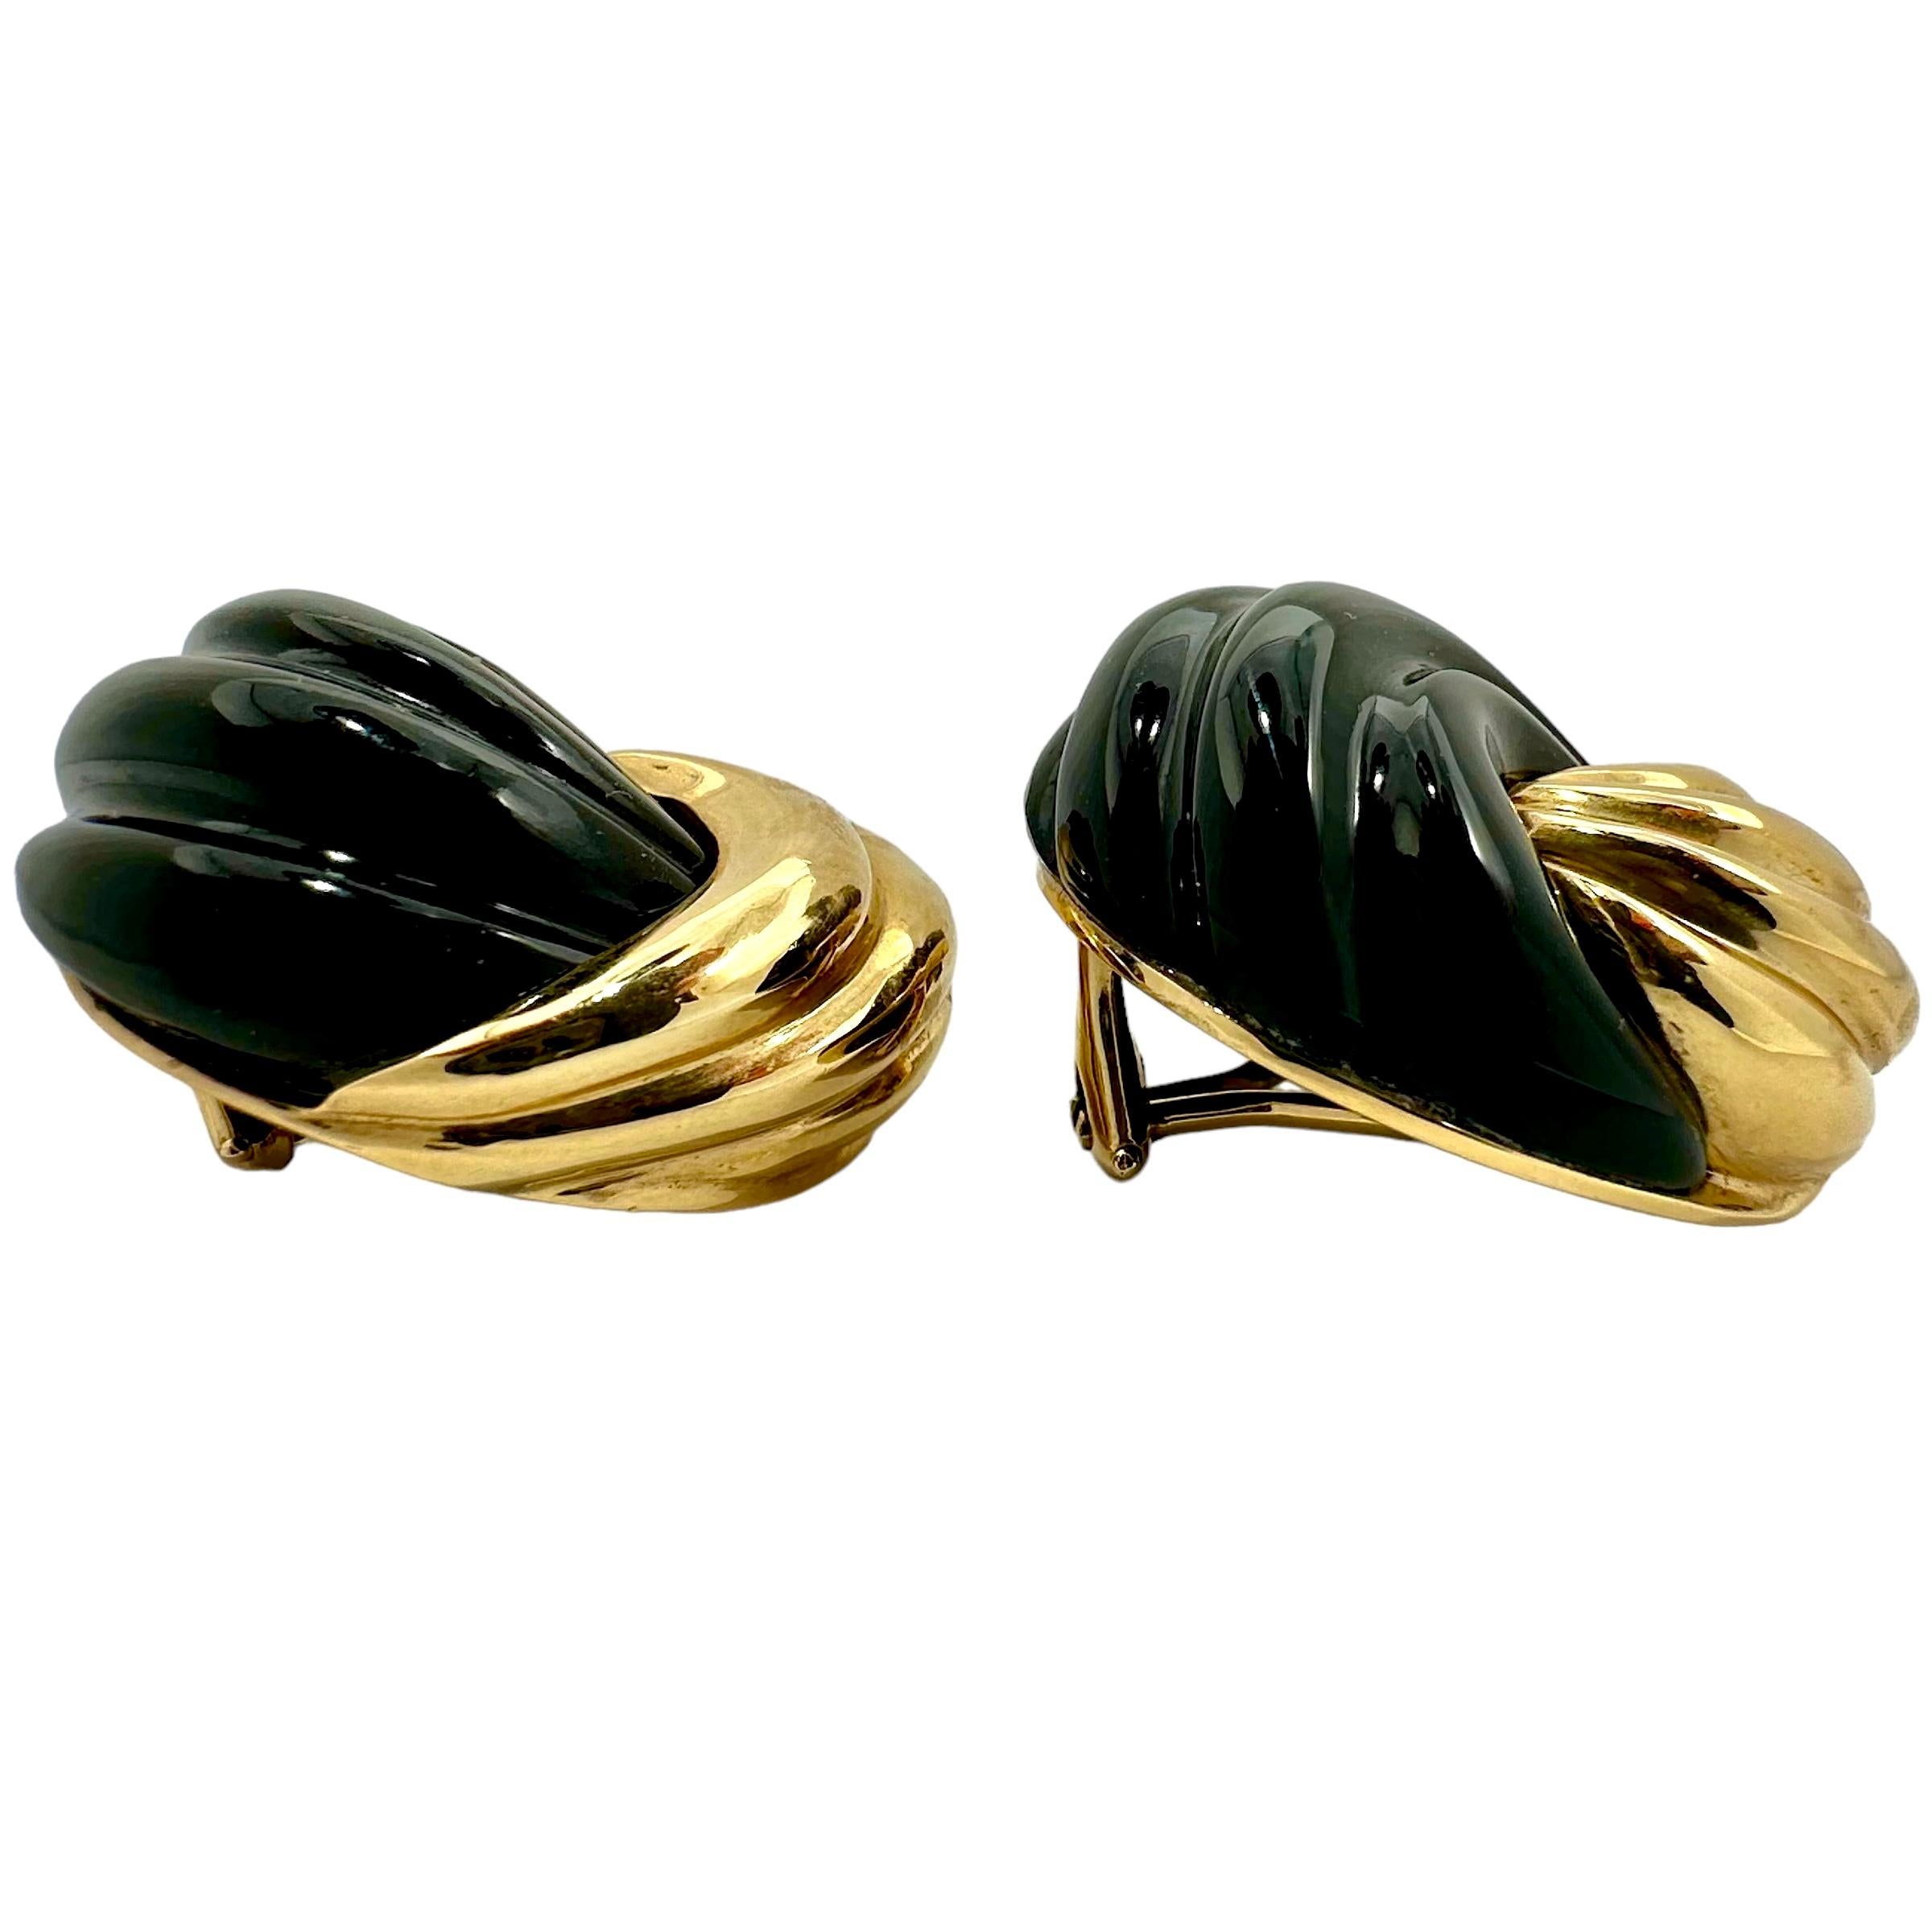 Vintage Fluted 14K Yellow Gold and Black Onyx Knot  Earrings by Designer Maz In Good Condition For Sale In Palm Beach, FL